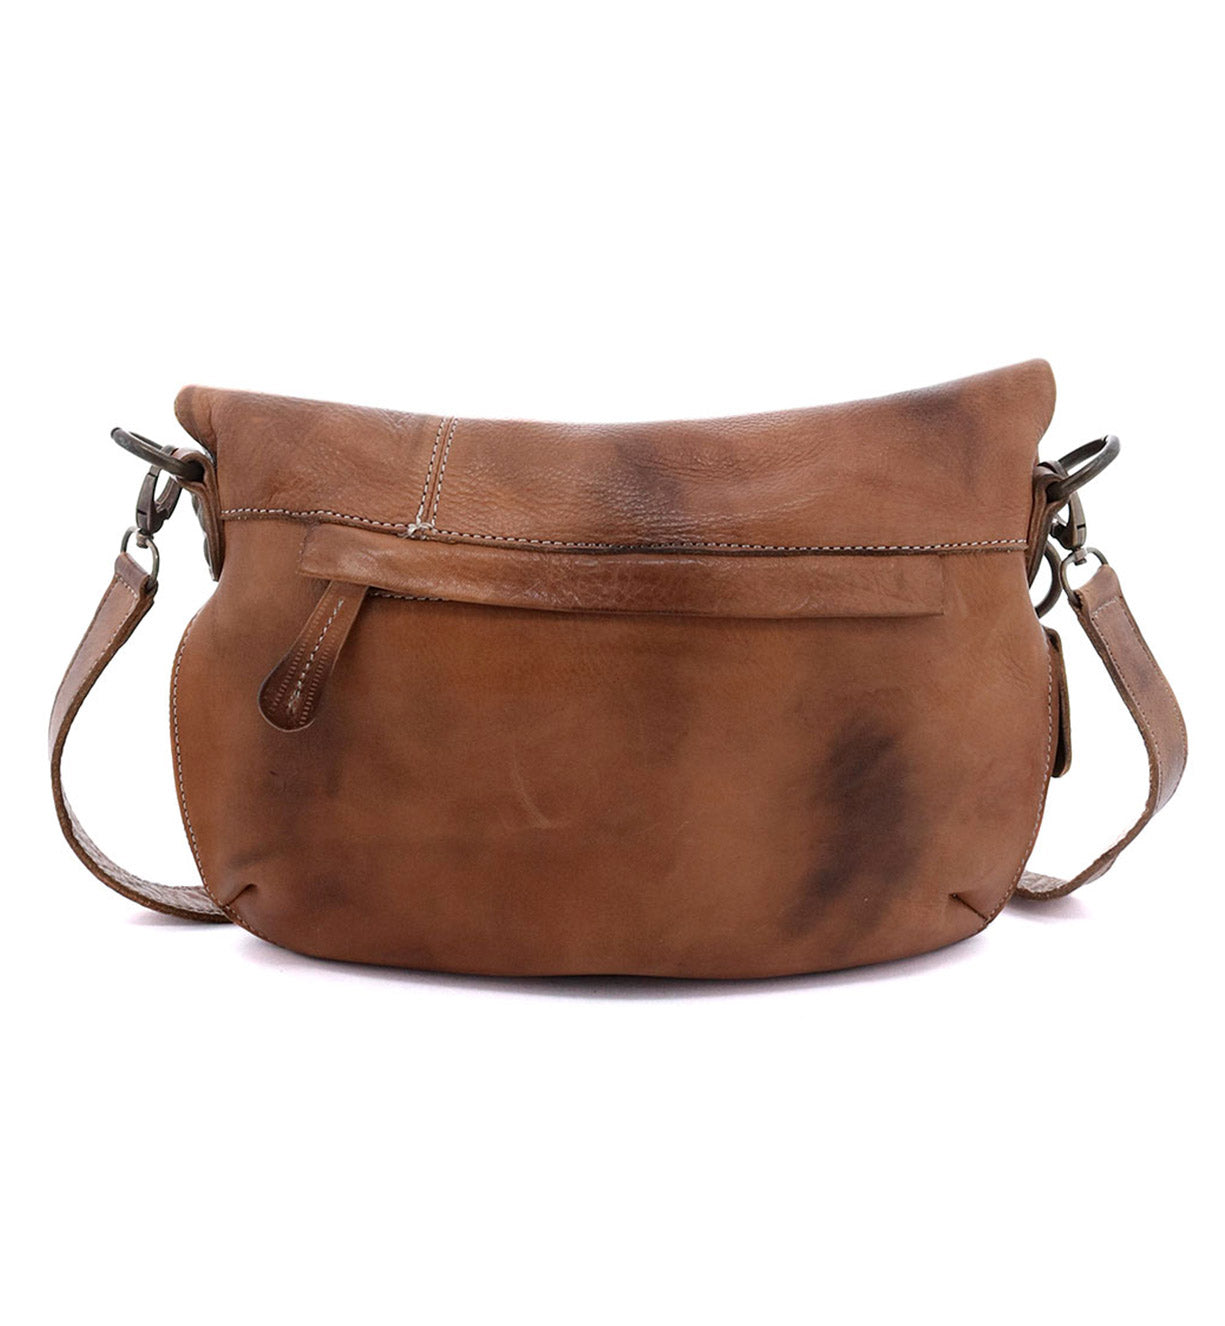 A brown leather Tahiti crossbody bag with a strap by Bed Stu.